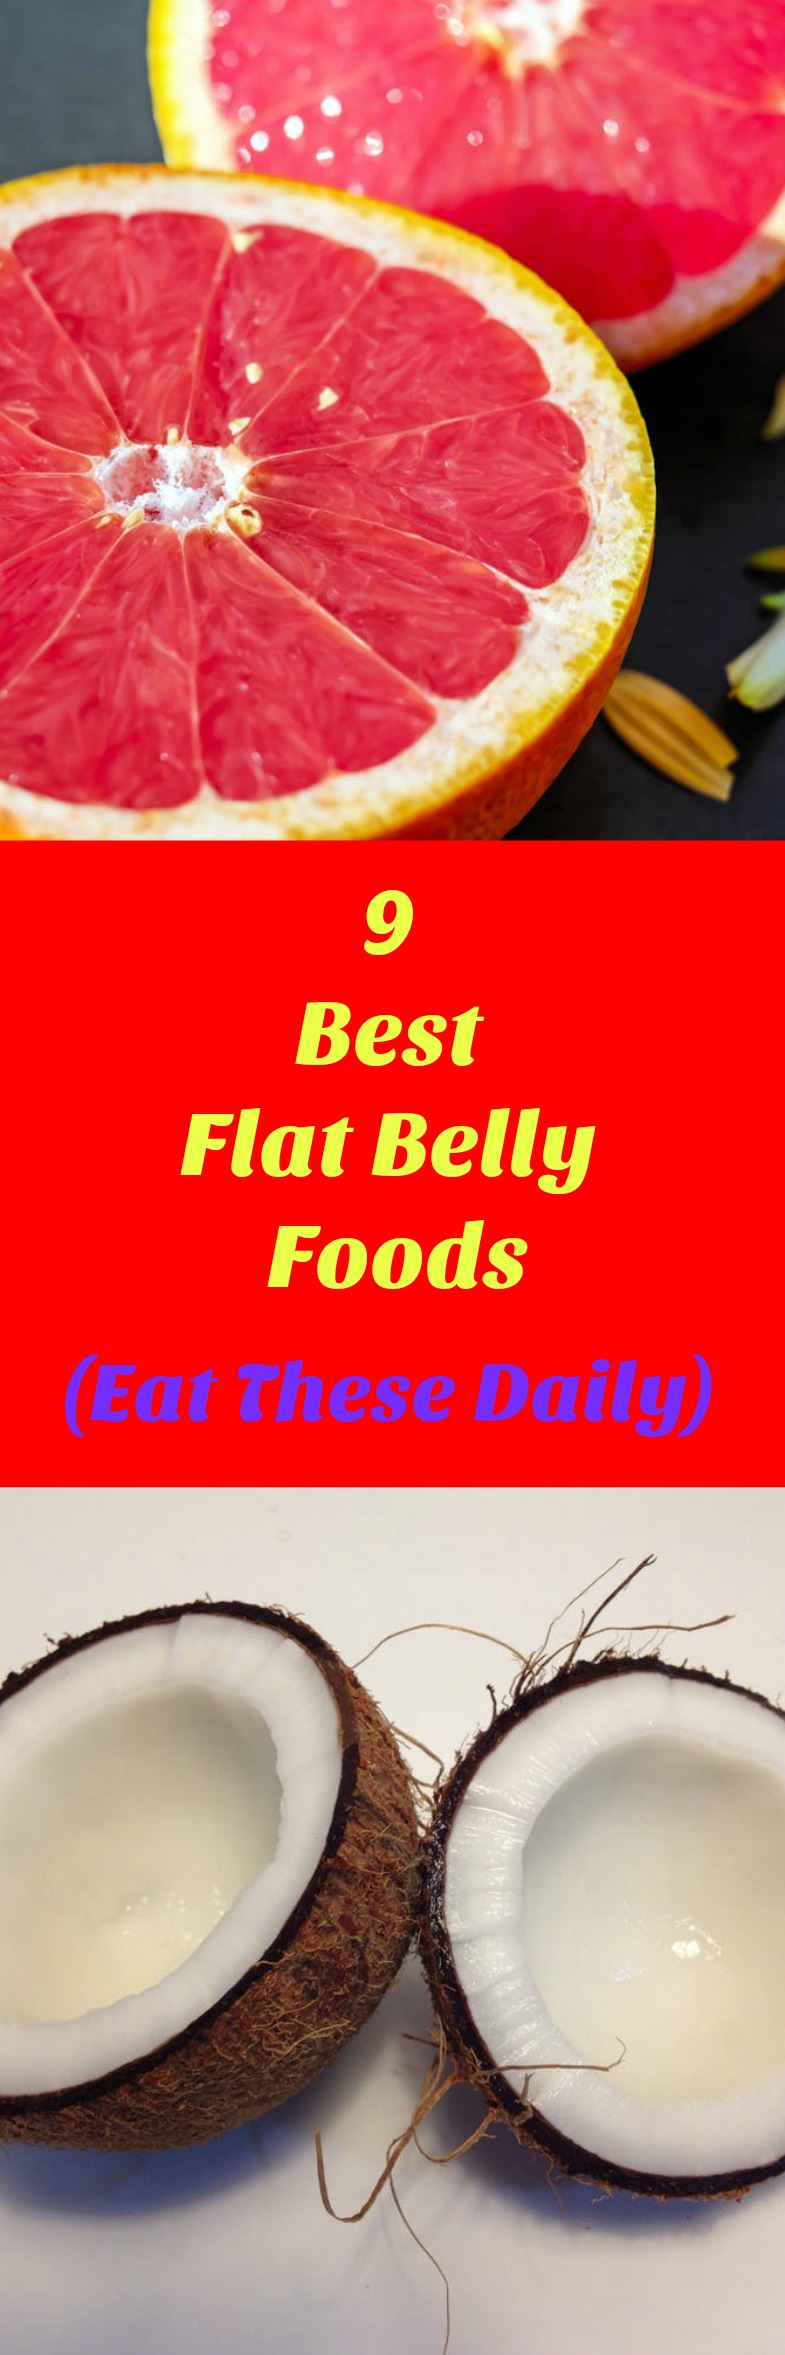 You must eat these 9 Best Flat Belly Foods daily to actually achieve that flat belly you have been training for! Watch what goes into your mouth and you will absolutely crush your goals. Number 5 will blow your mind.